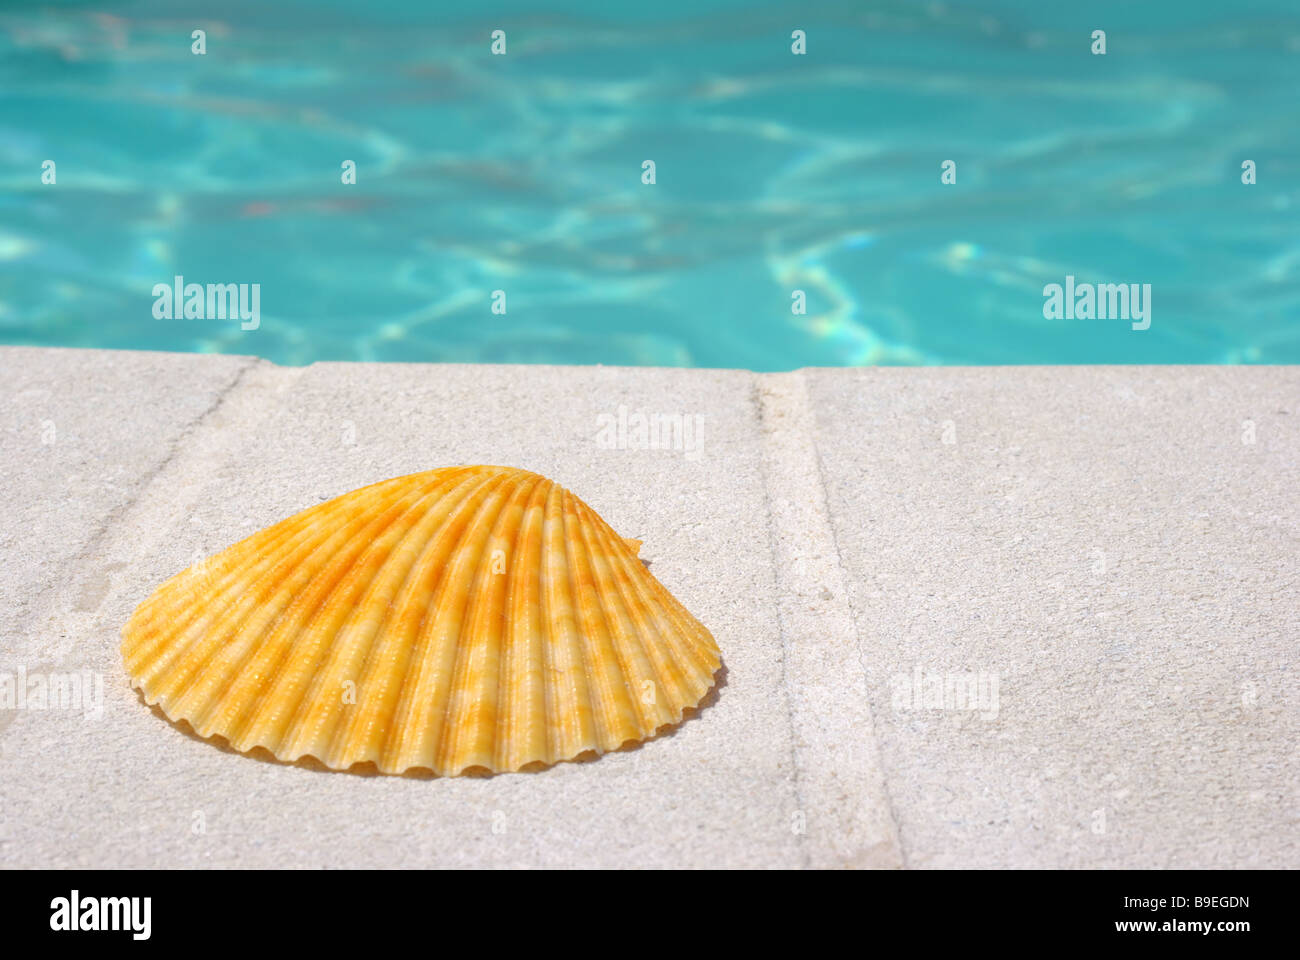 Shell on pool side Stock Photo